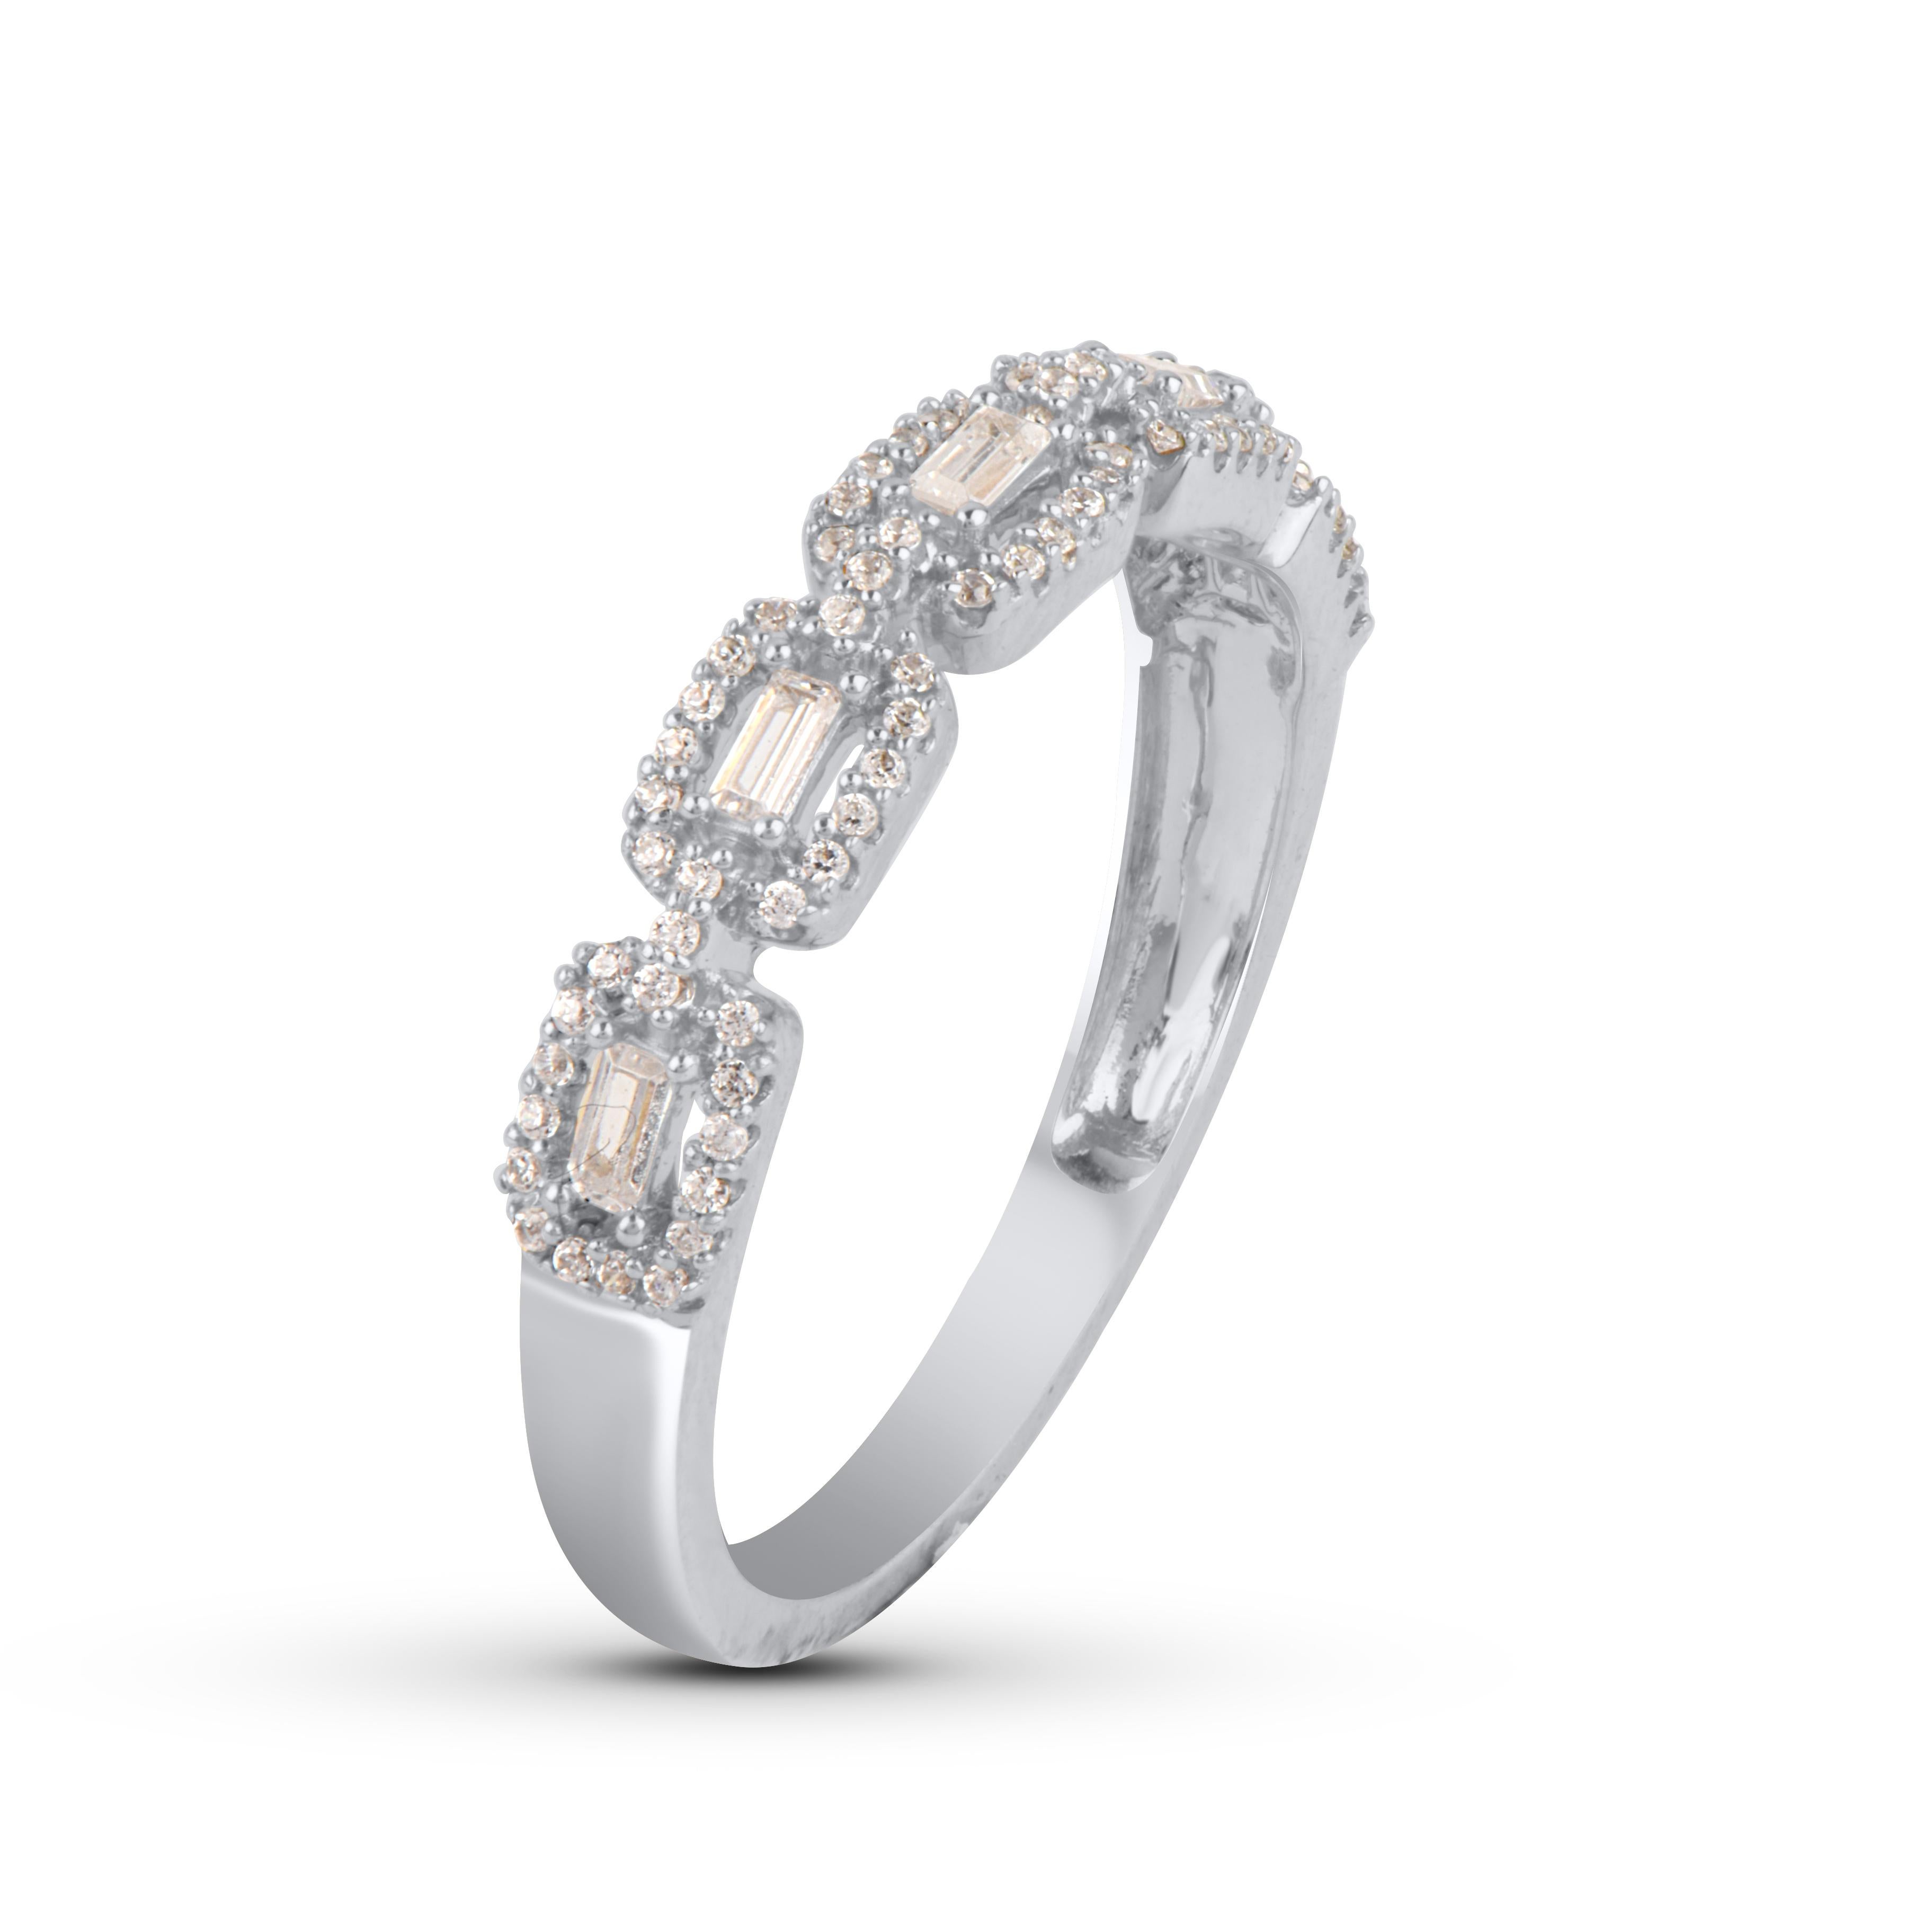 Bring charm to your look with this diamond wedding band Ring. This ring is beautifully crafted in 14 Karat white gold and embedded with 81 single cut round and baguette cut diamonds in prong setting. Total diamond weight is 0.25 carat. The diamonds